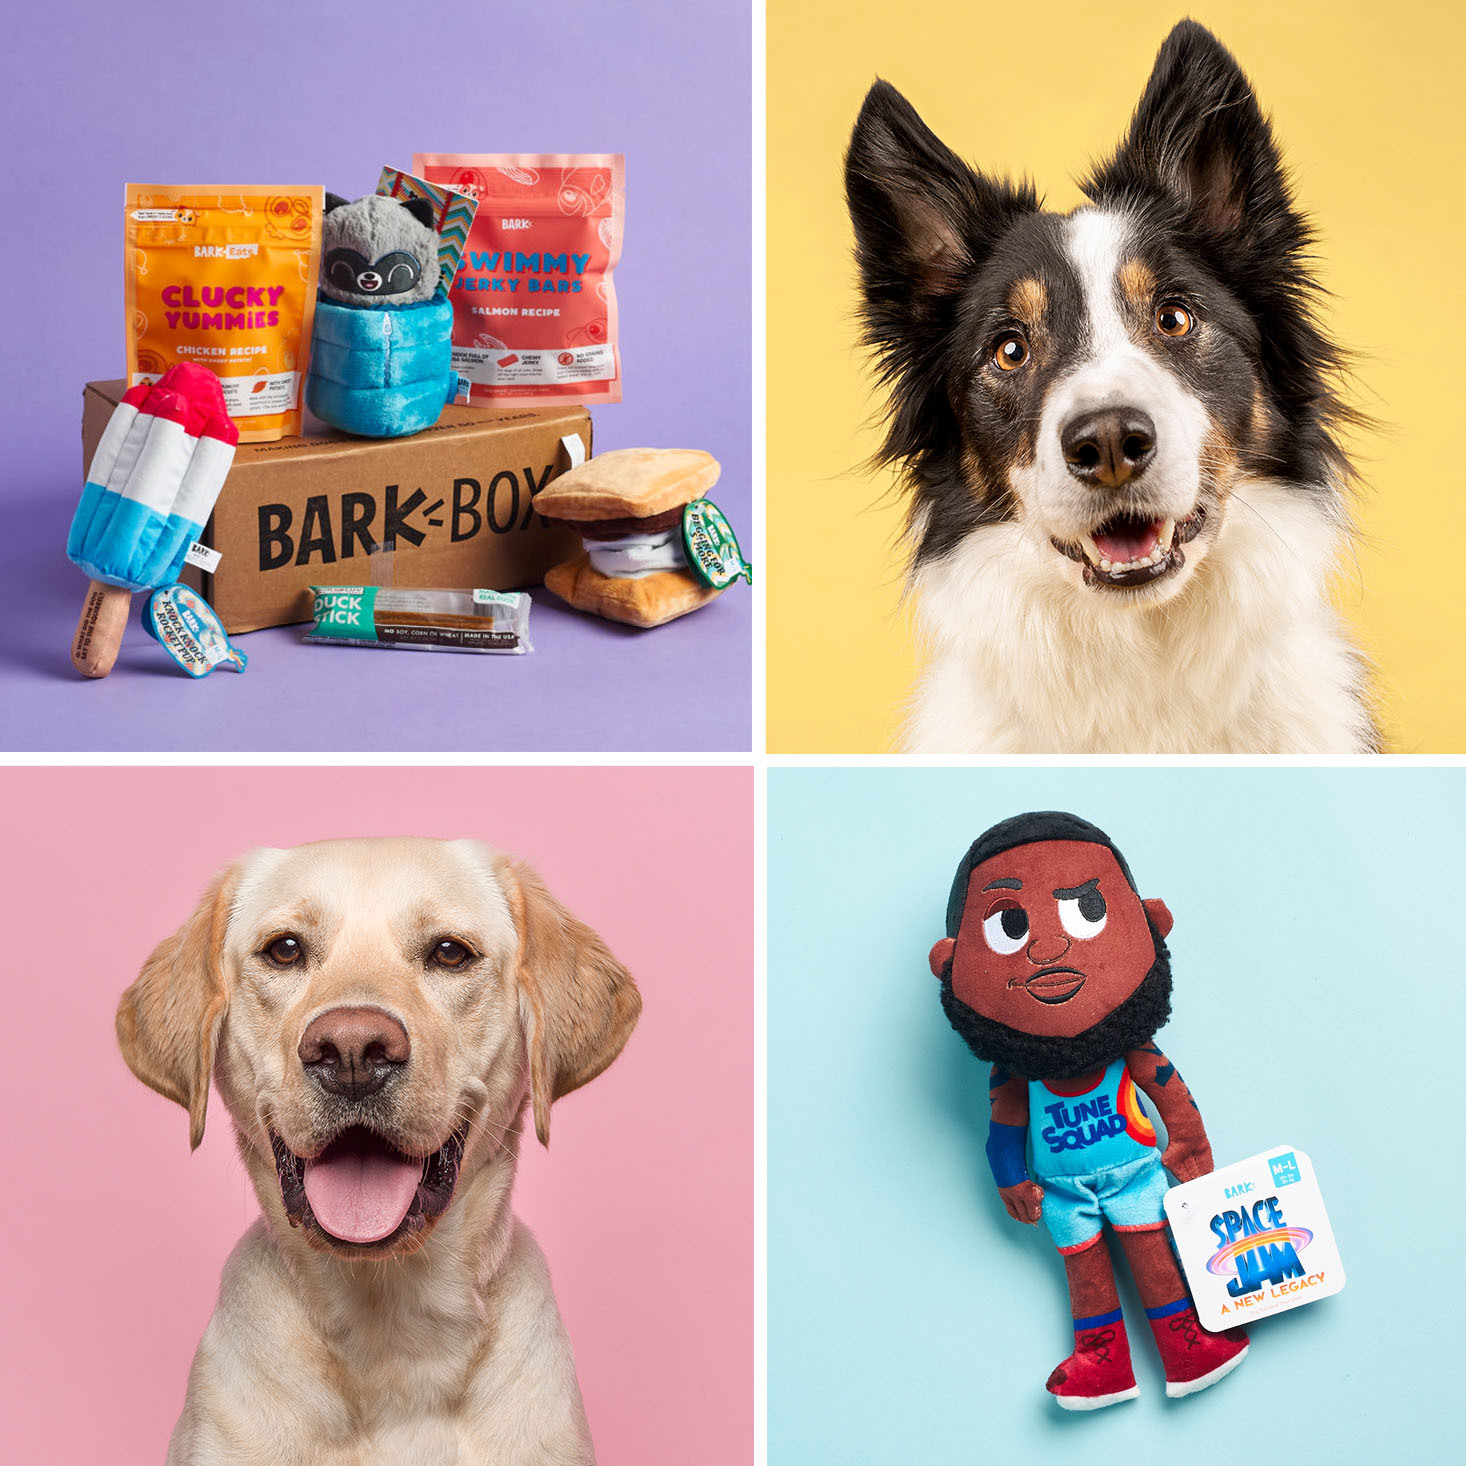 6 Things I Like About BarkBox and 2 Things I Don’t